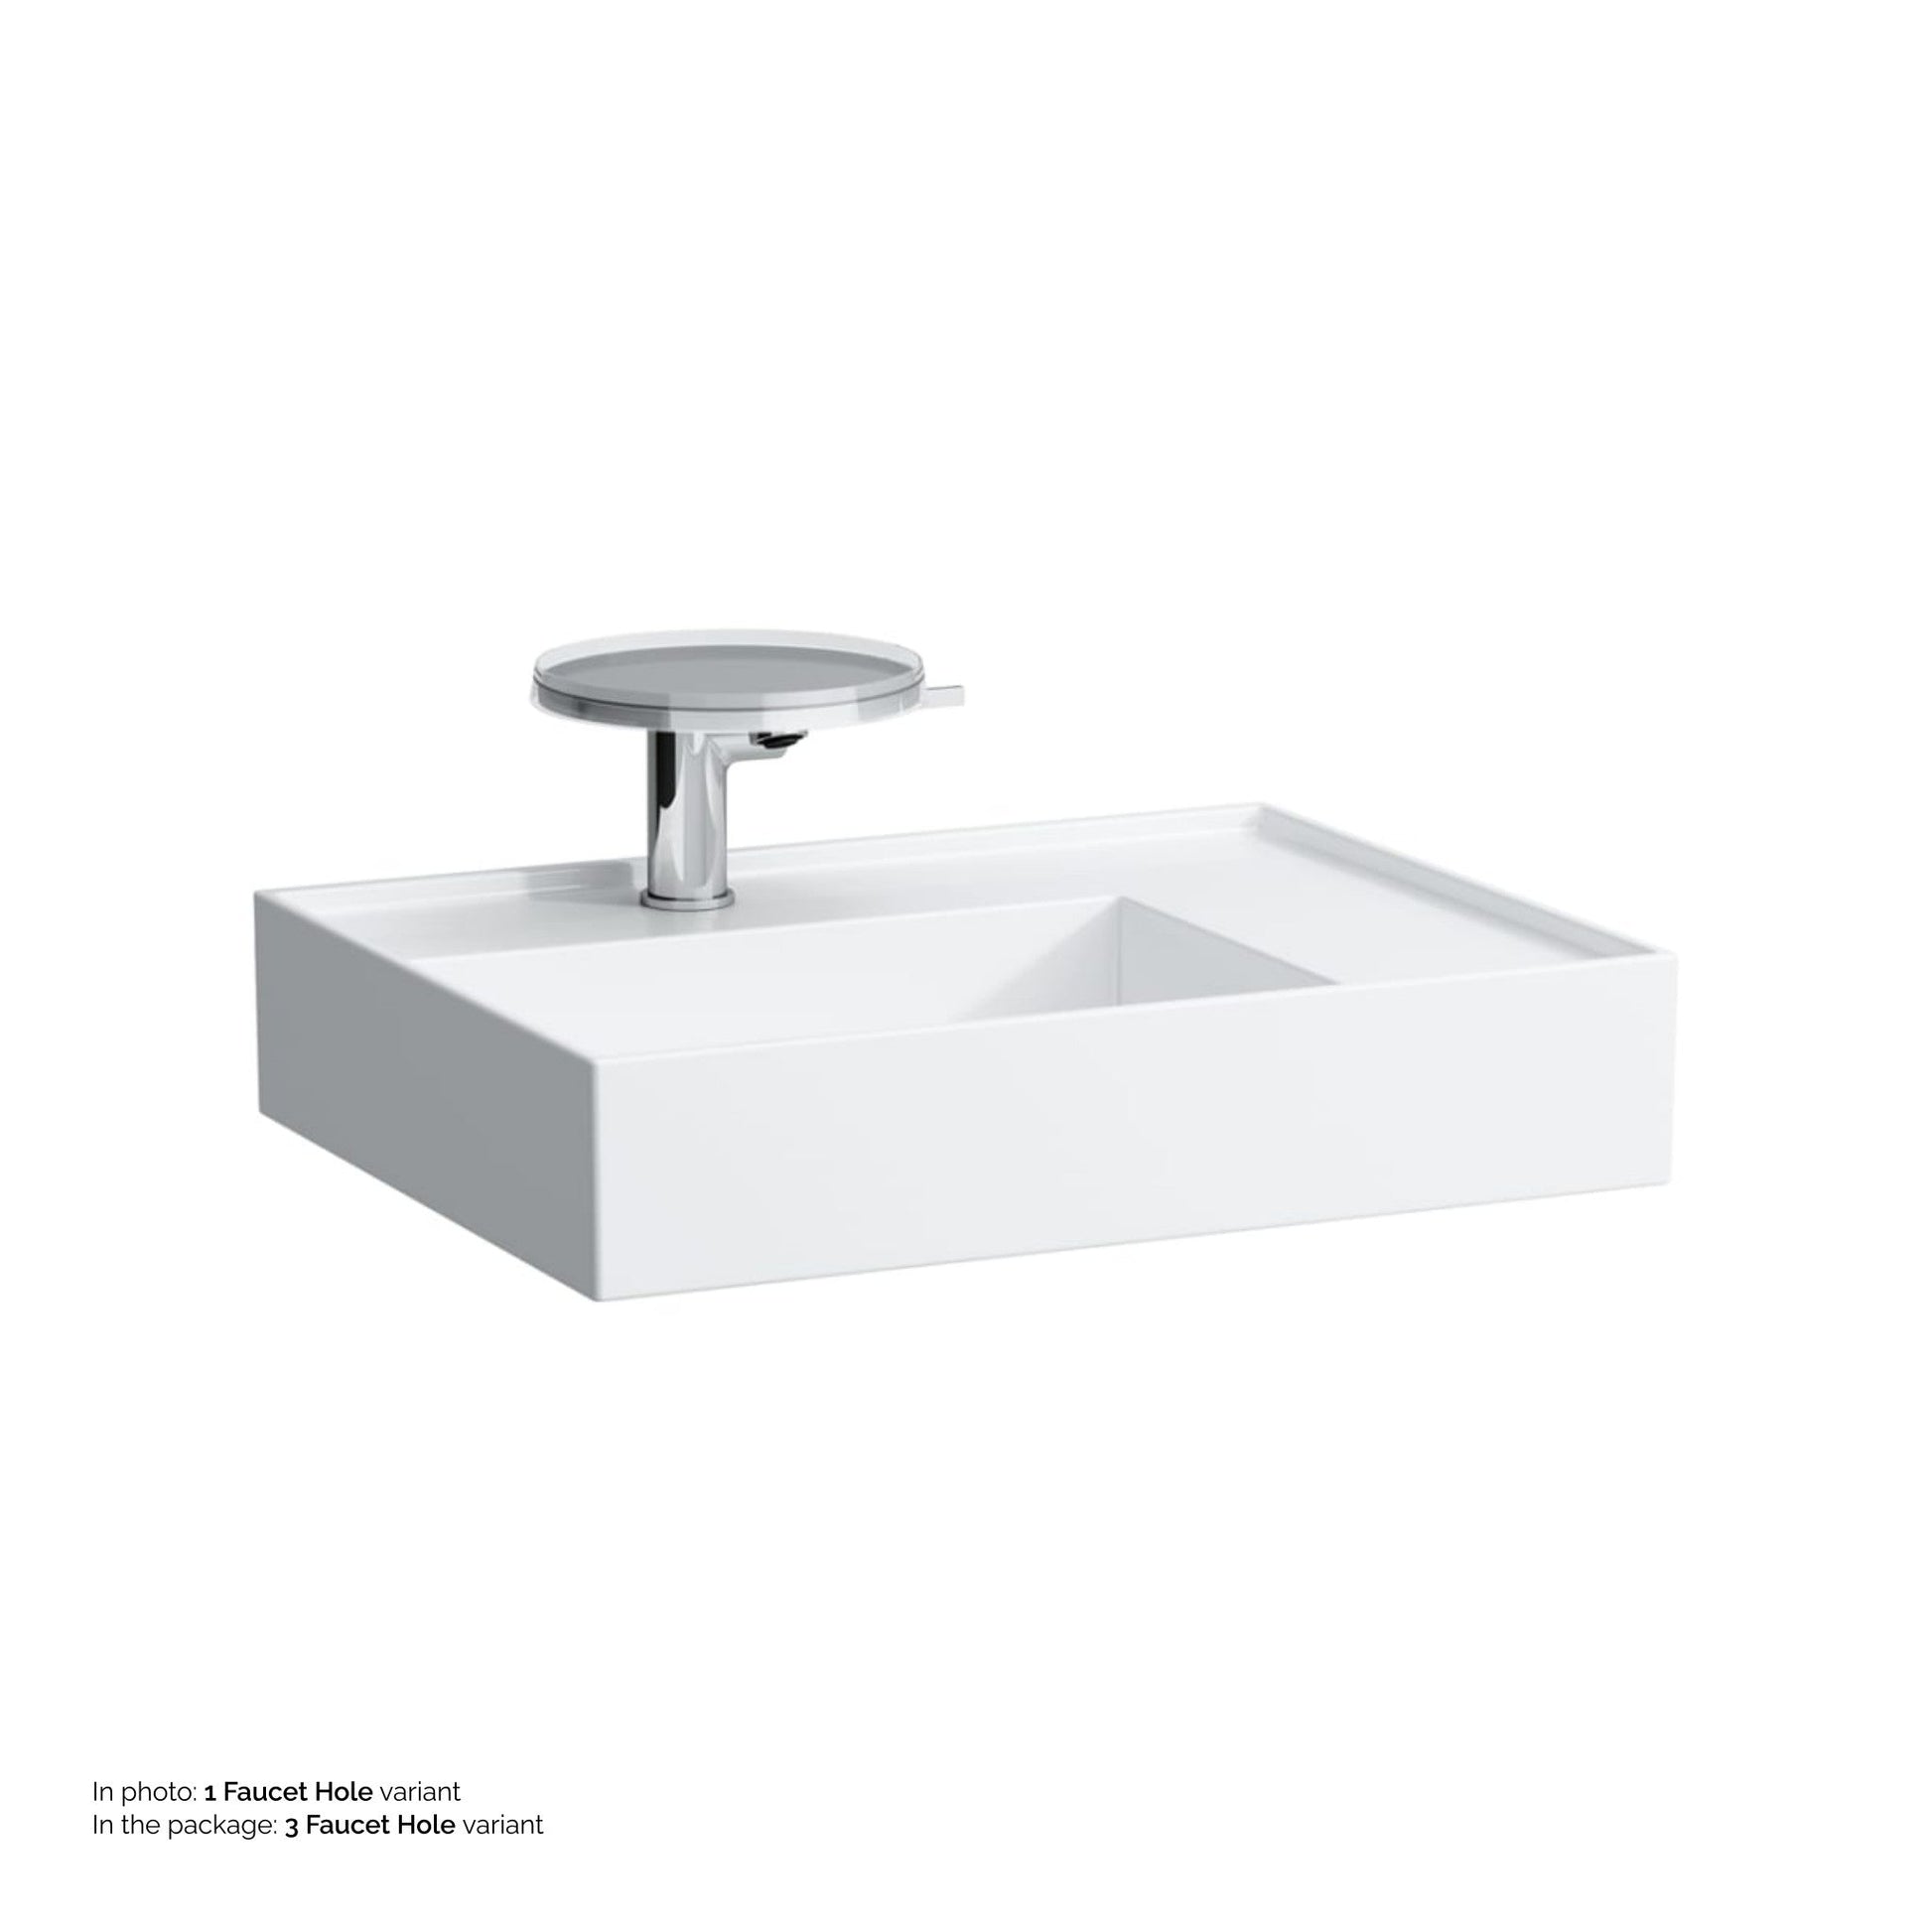 Laufen Kartell 24" x 18" White Countertop Shelf-Right Bathroom Sink With 3 Faucet Holes